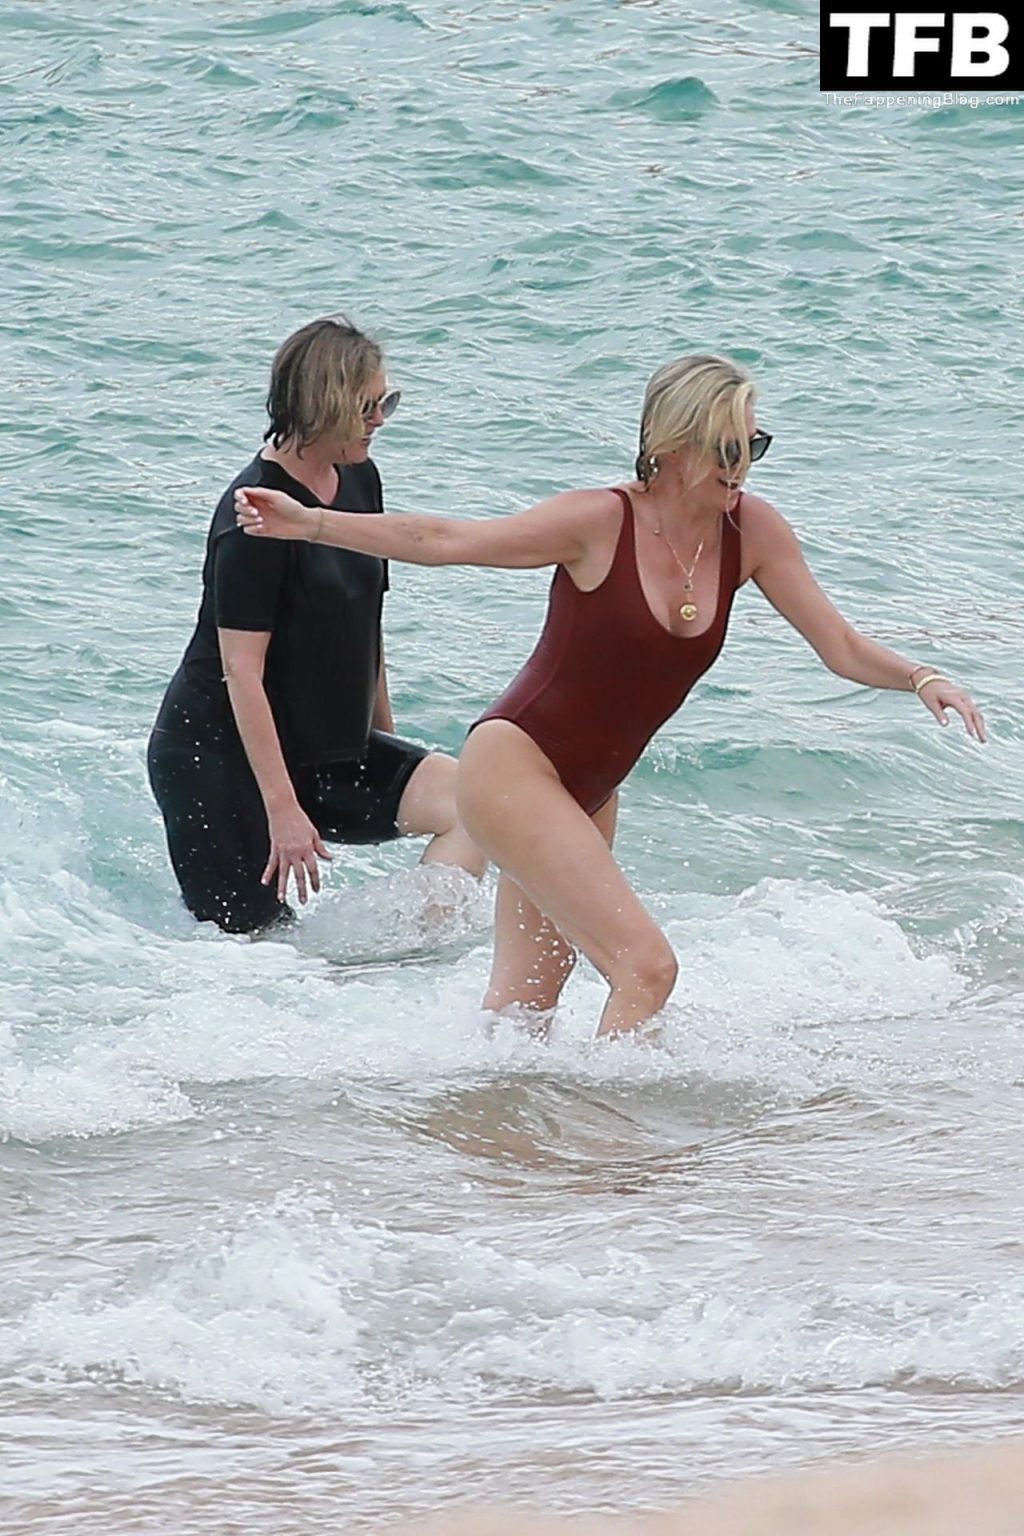 Charlize Theron Sets Pulses Racing in a Red Hot One-Piece Swimsuit (61 Photos)